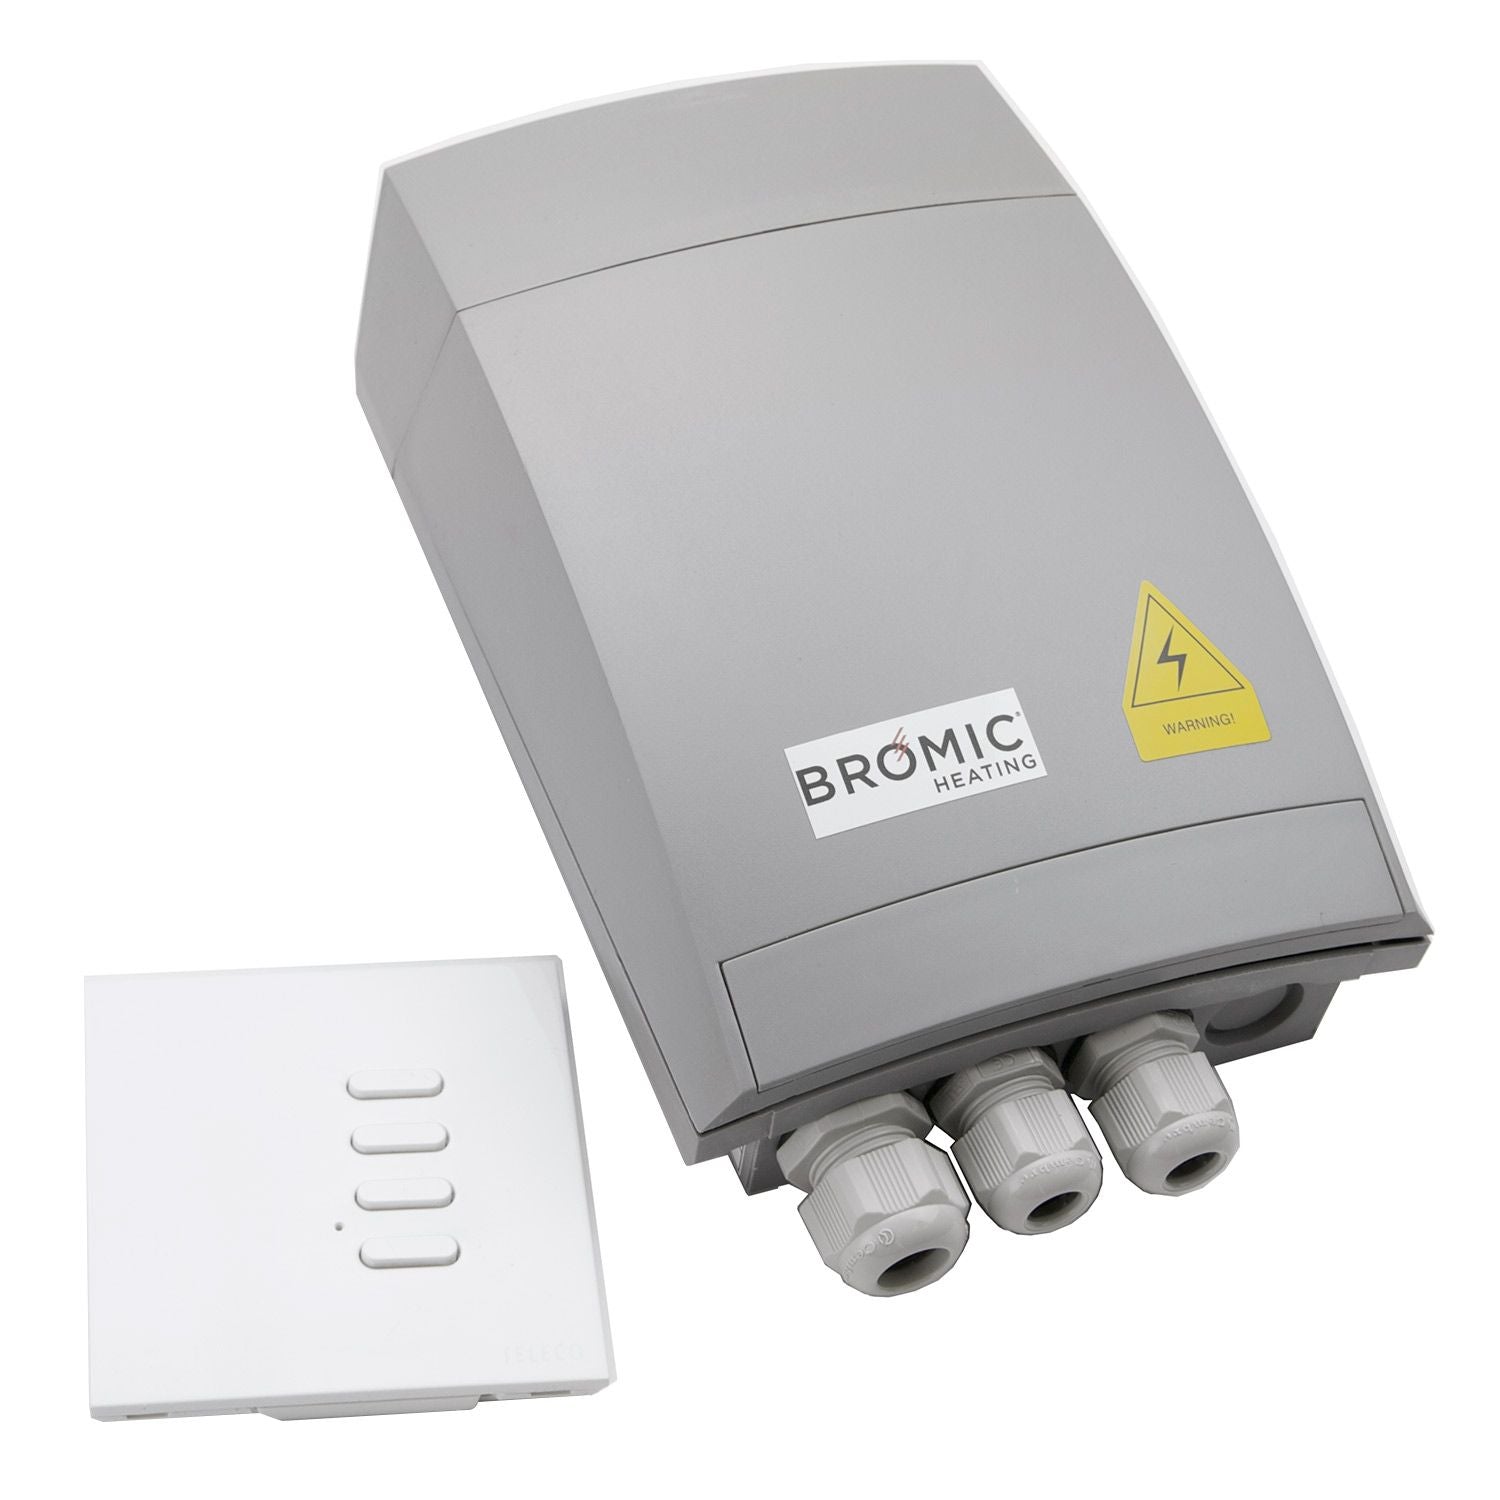 Bromic Heating - Wireless On/Off Controller and Transmitter for Gas and Electric Heaters - BH3130010-1